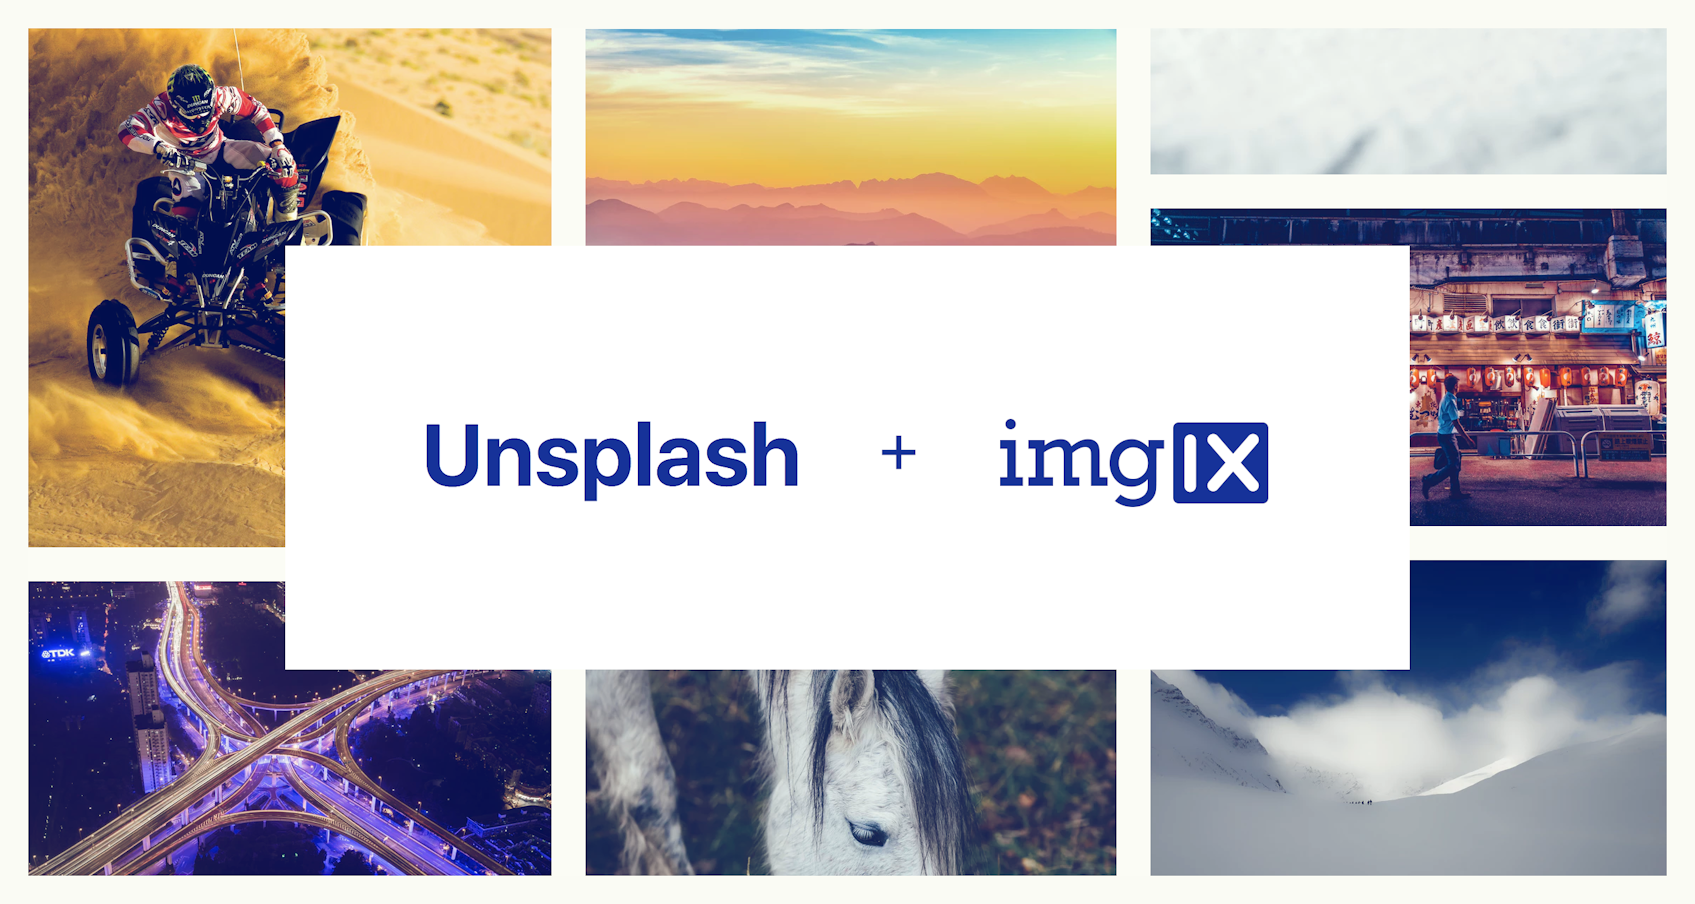 The Service Powering Unsplash’s Beautiful Imagery